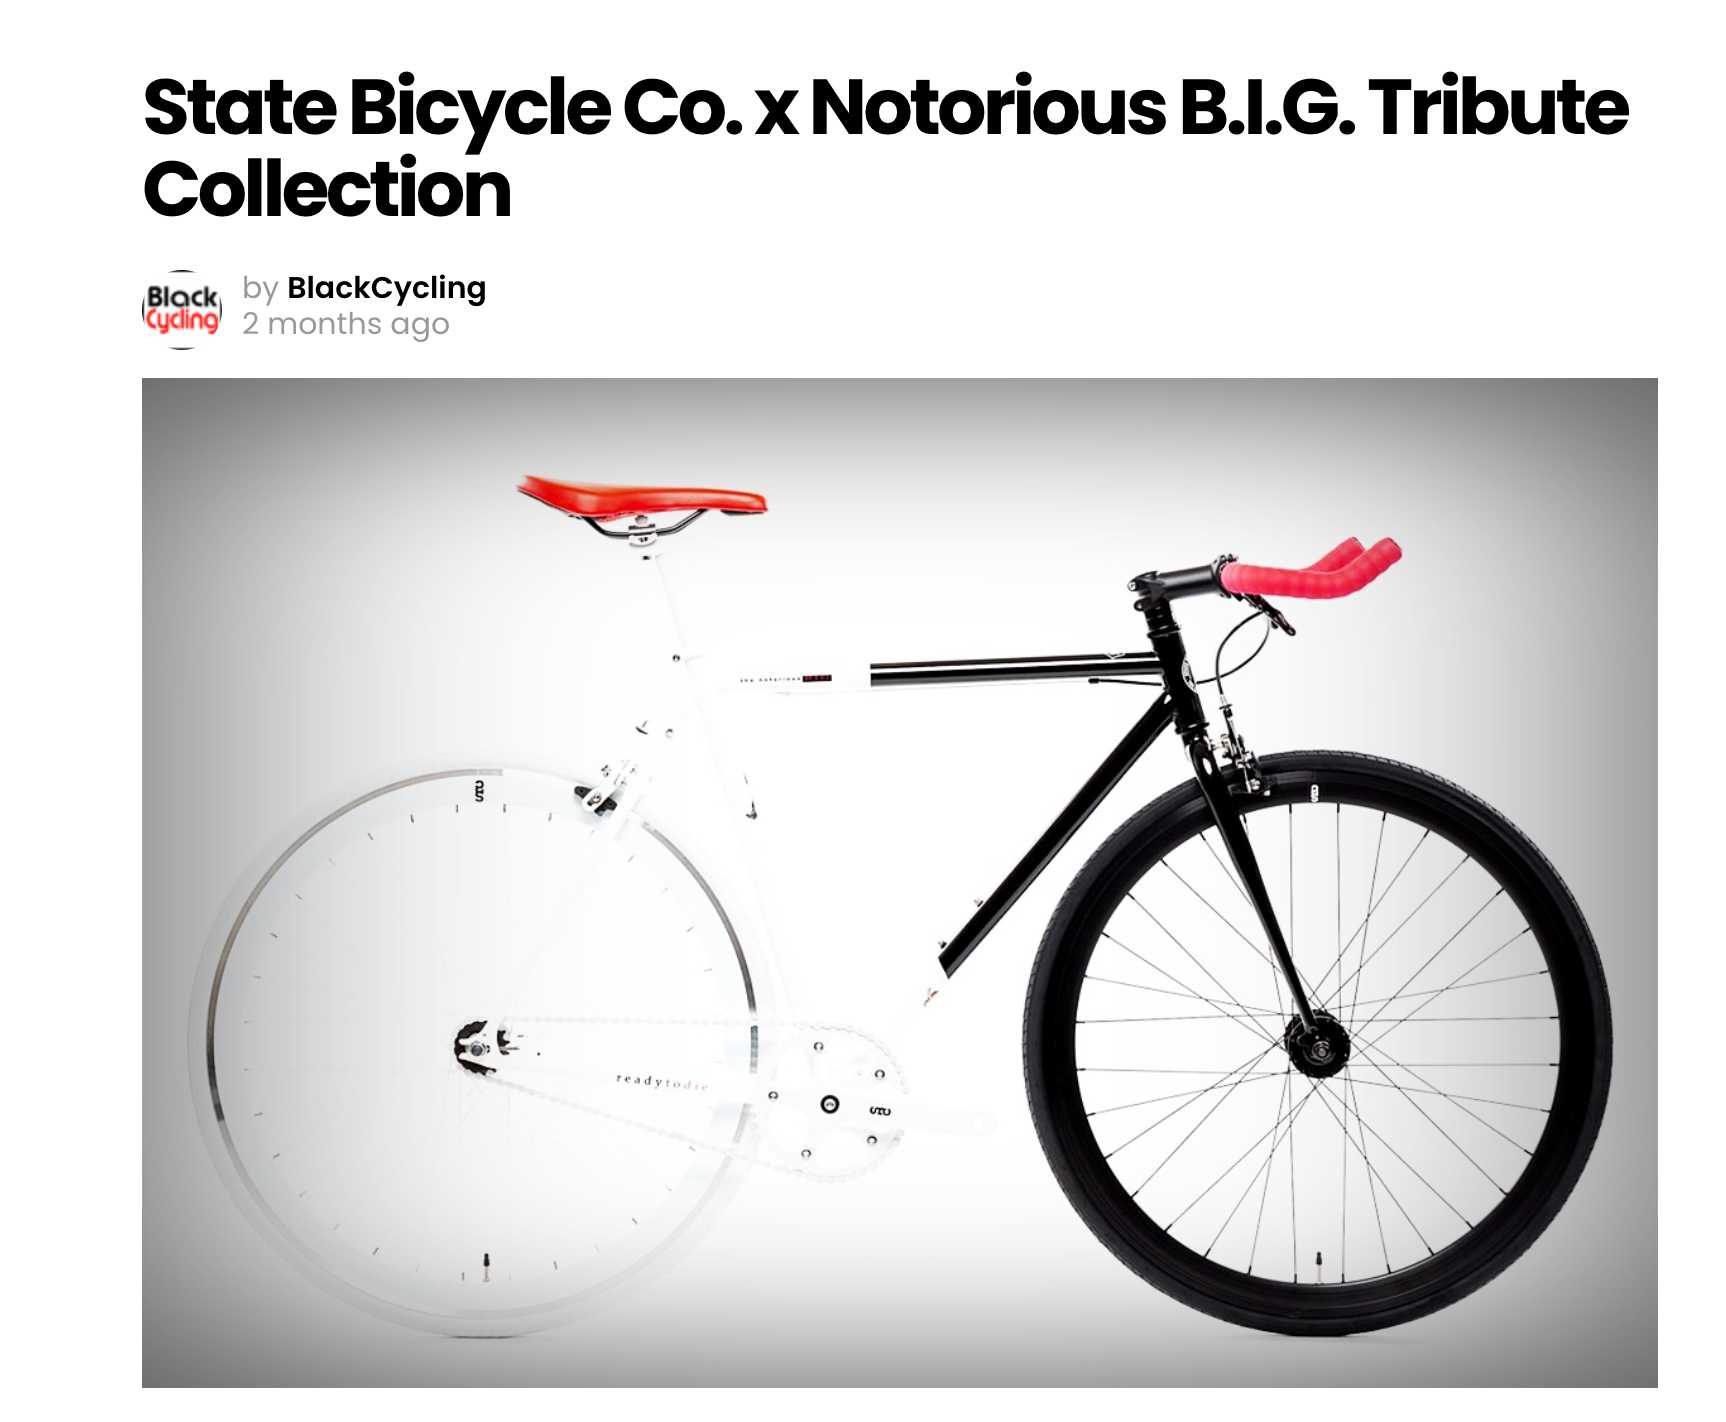 Black Cycling: State Bicycle Co. x Notorious B.I.G. Tribute Collection